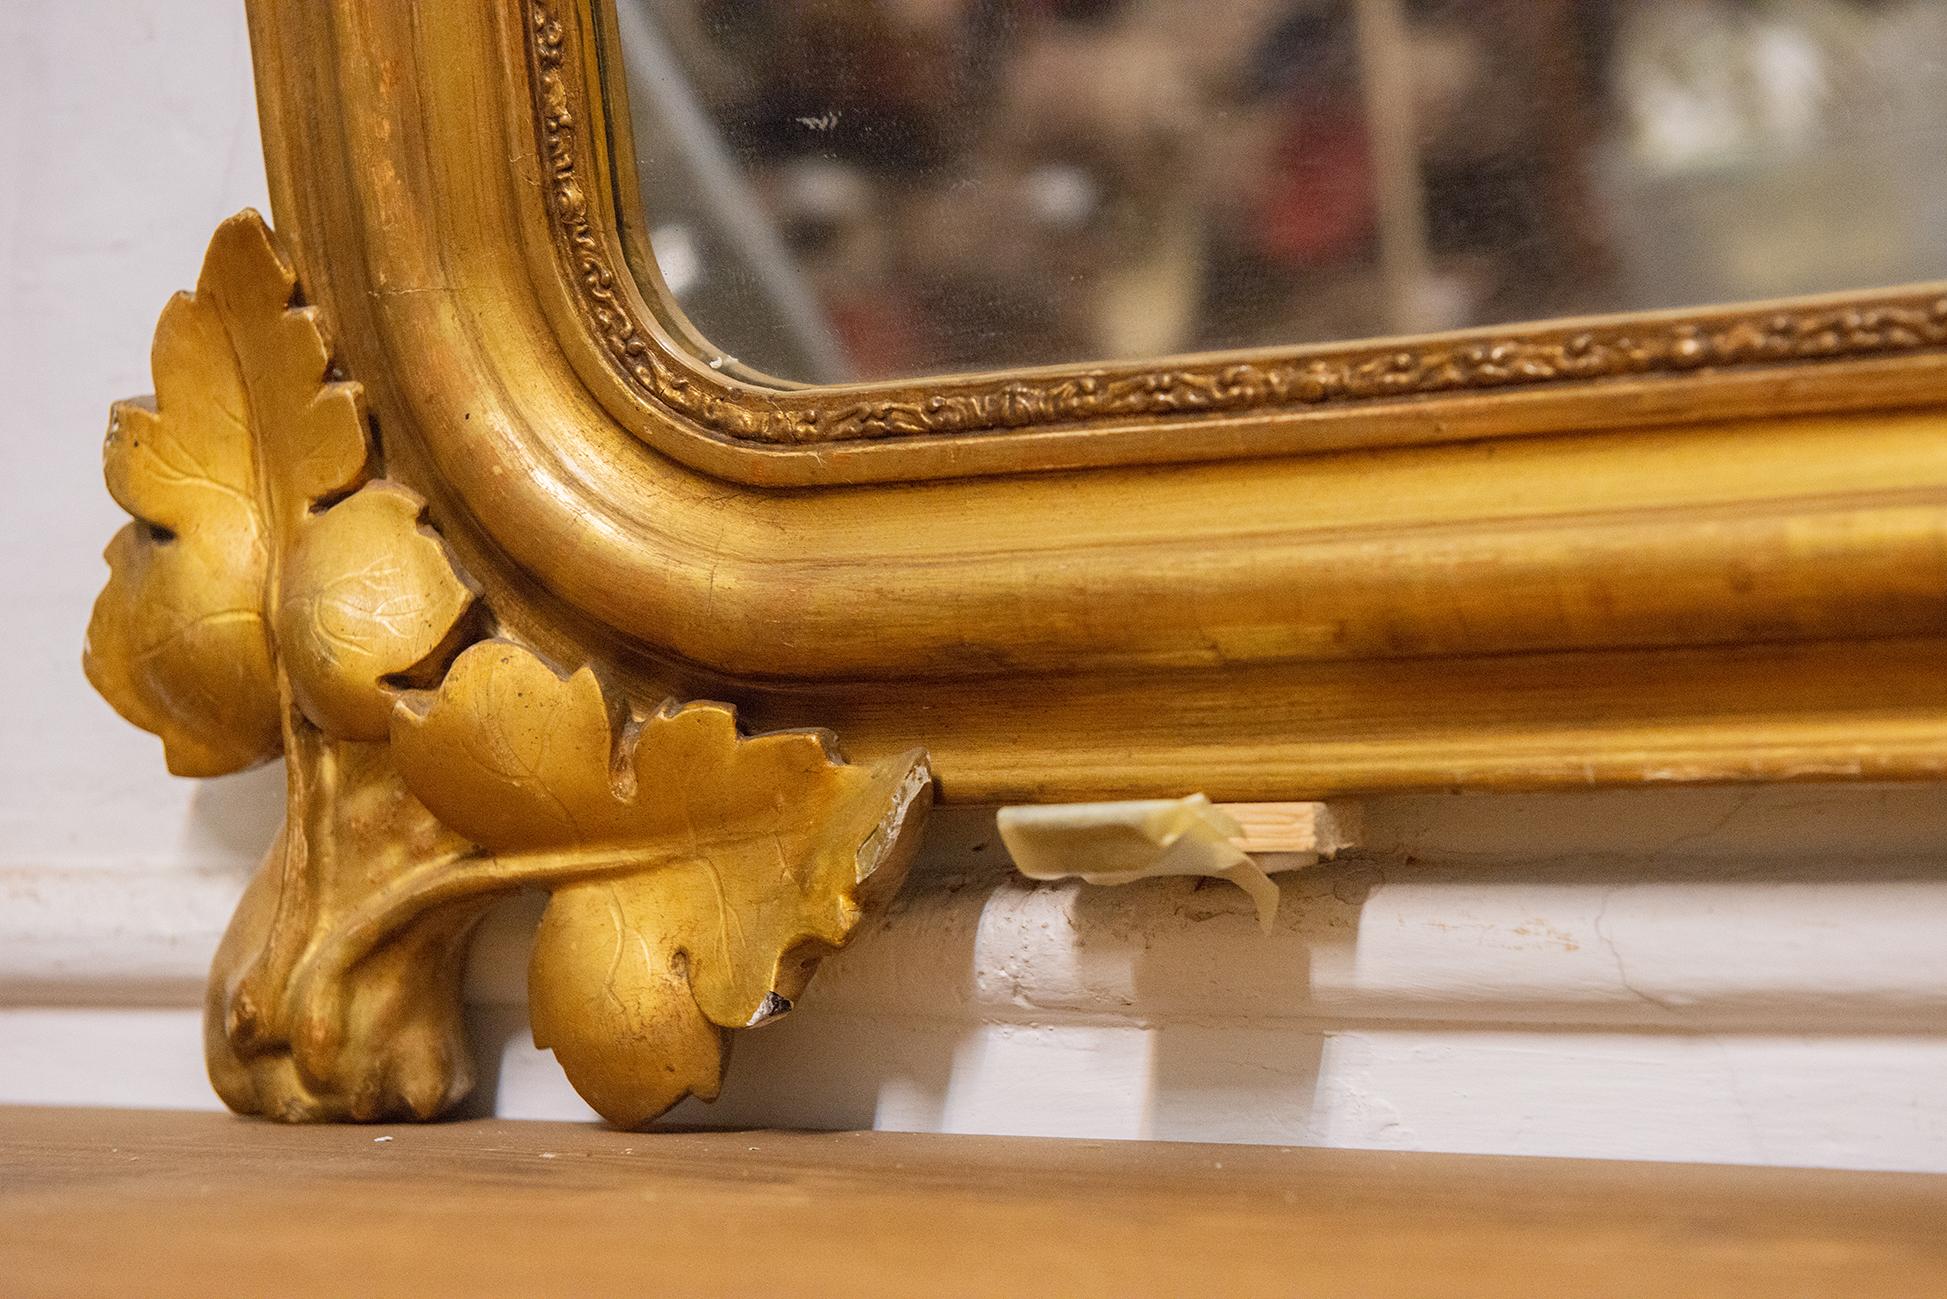 M/1357 - Antique elegant gilded mirror with carved grapes : lucky charm !
Perfect on a shelf, a sideboard, a fireplace, a dresser. The gilding is perfect.